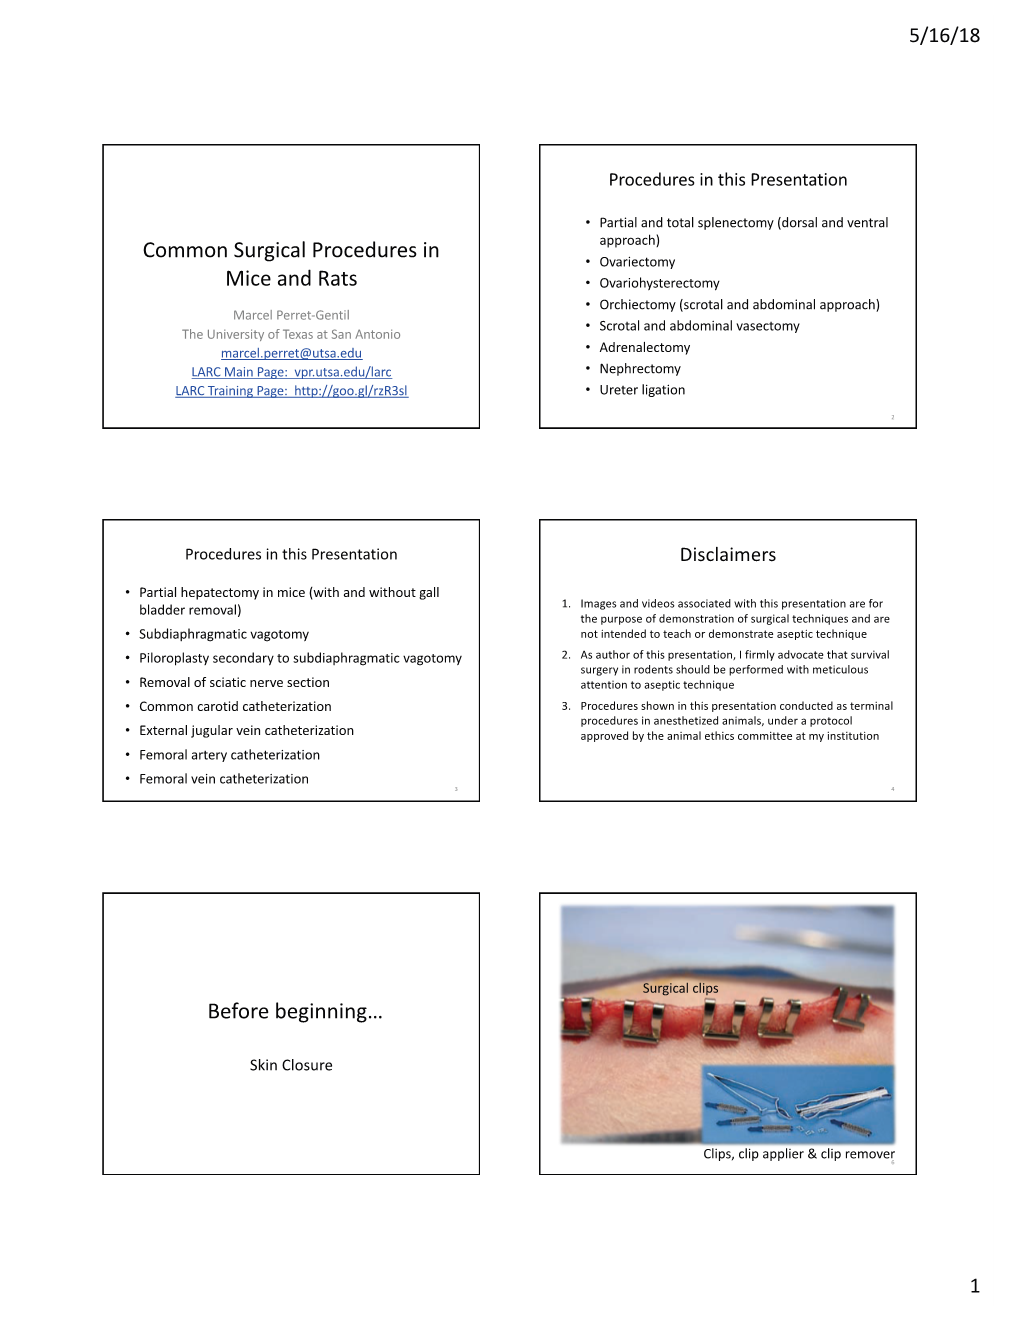 Common Rodent Surgical Procedures in English Updated 5-16-18